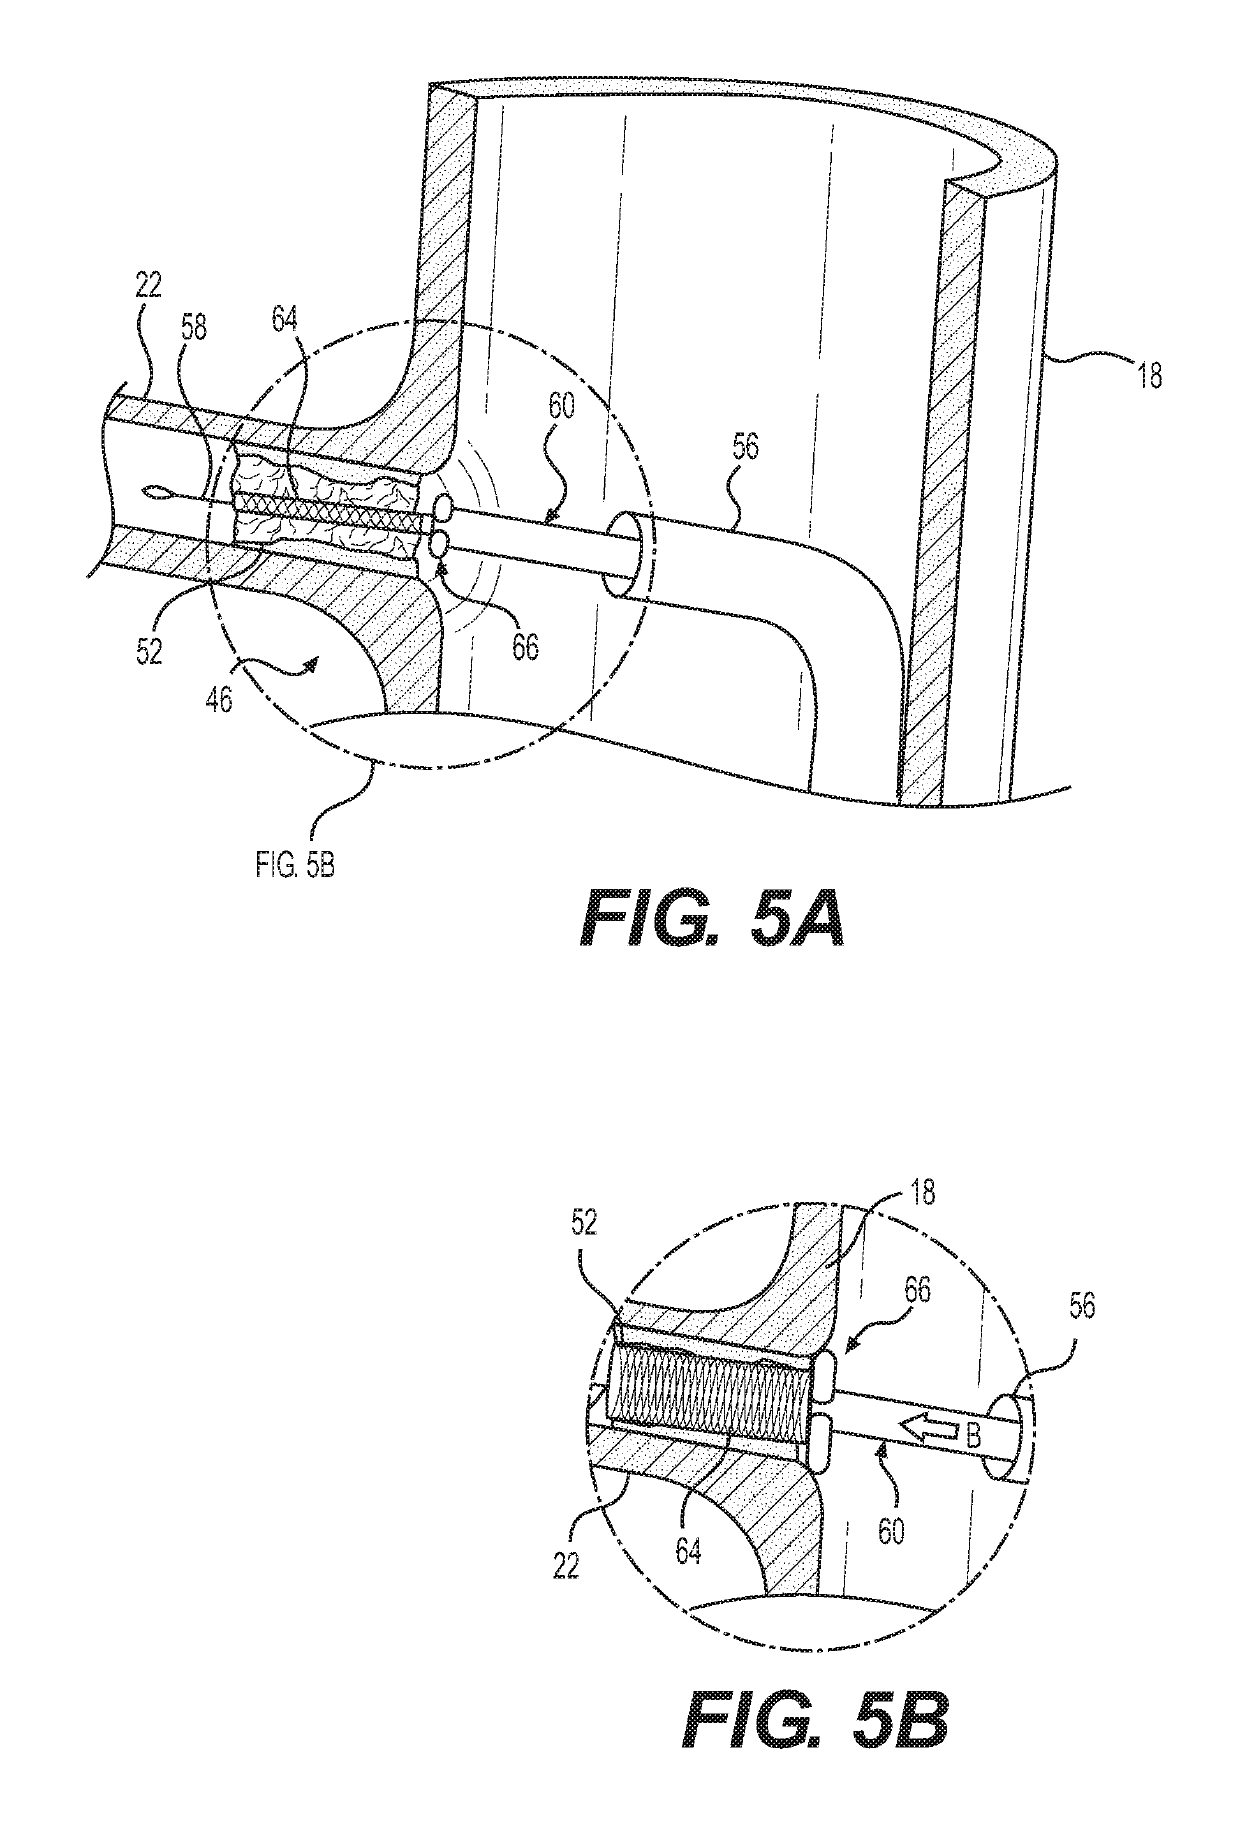 Angioplasty anchor and/or marker balloon stent catheter apparatus and method